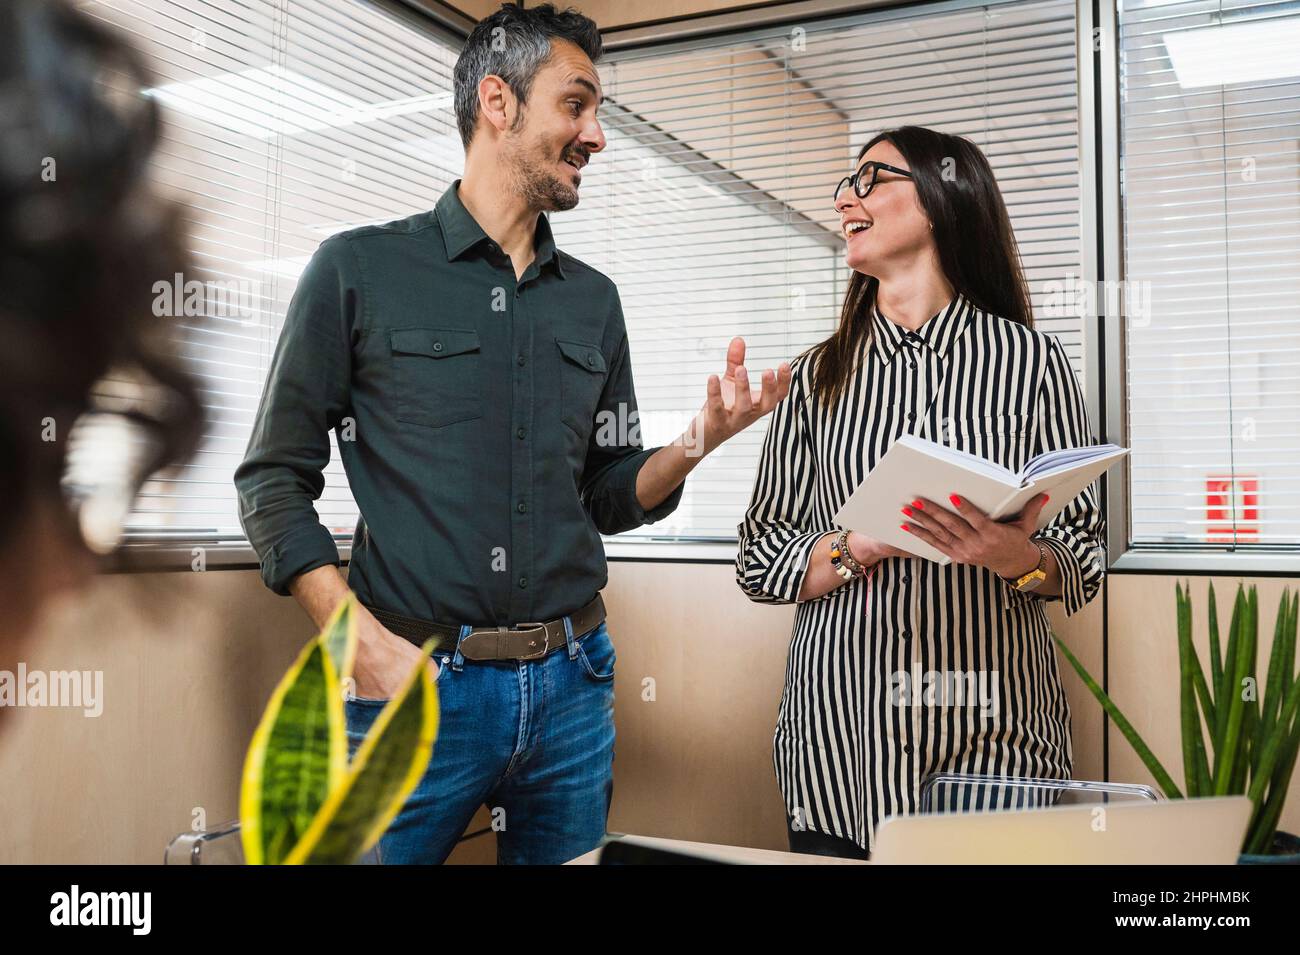 Middle age man and woman discussing a project in an office room. Stock Photo